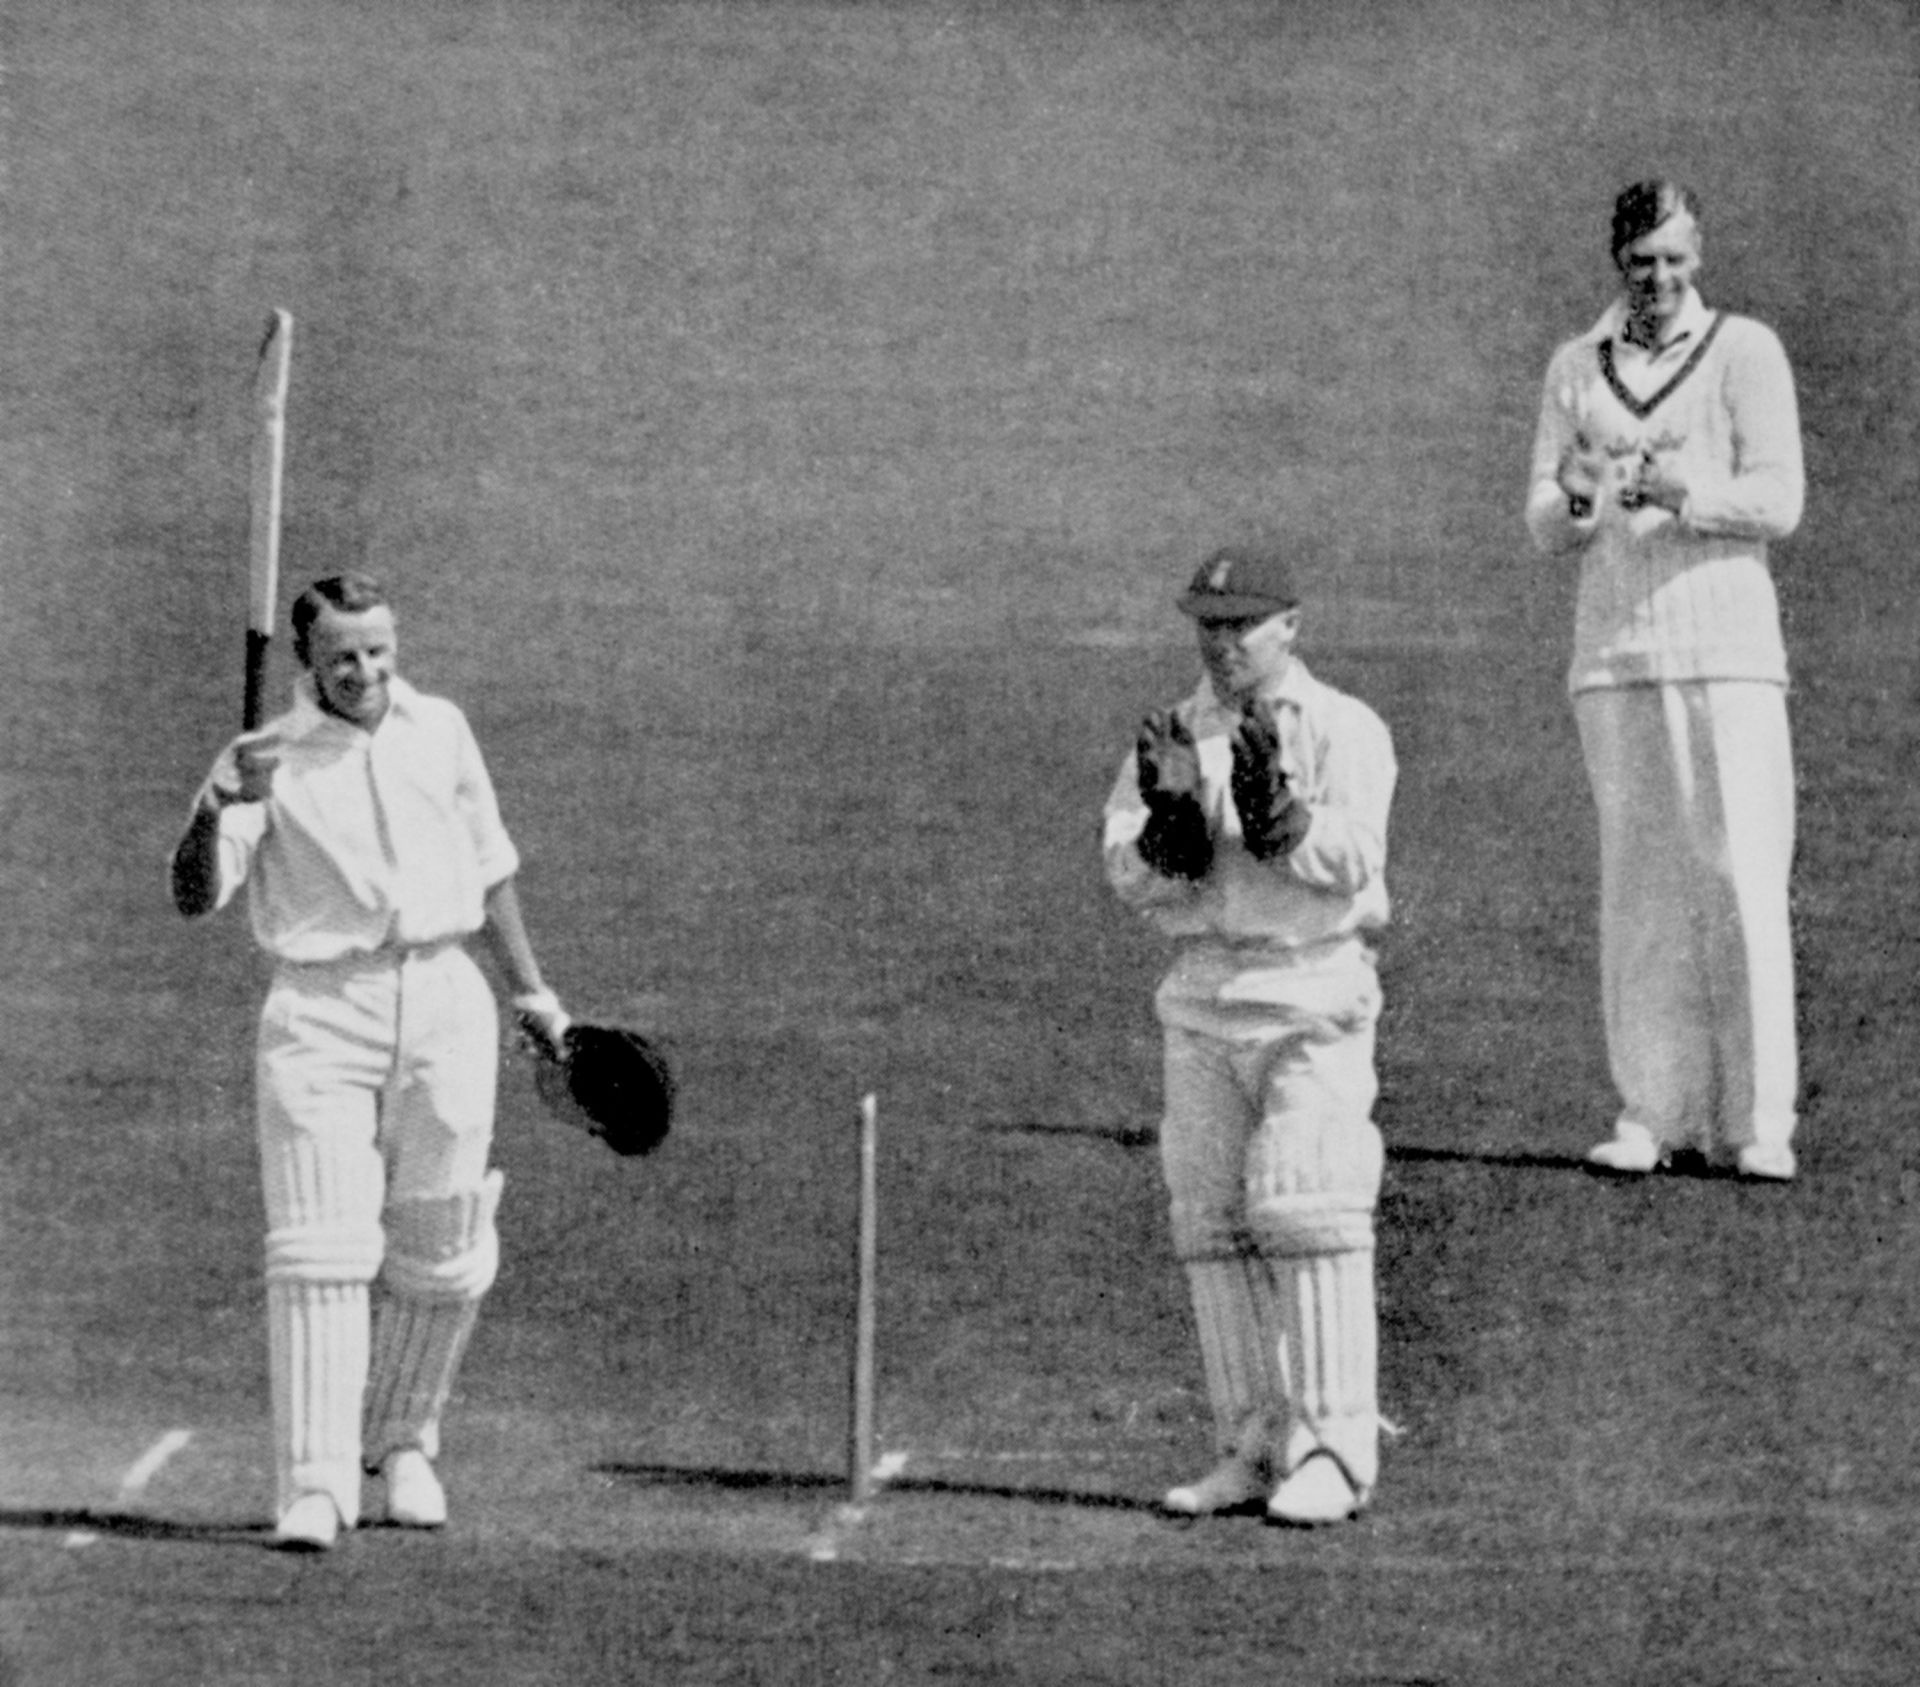 With the series tied 1-1, Bradman&rsquo;s superb 232 turned the final Test in Australia&rsquo;s favour in this magical England tour of 1930. Having hit up a still unsurpassed 974 runs in the series, including a century, two double centuries and the record triple century, and won the Ashes, Bradman became the biggest superstar the game has ever seen